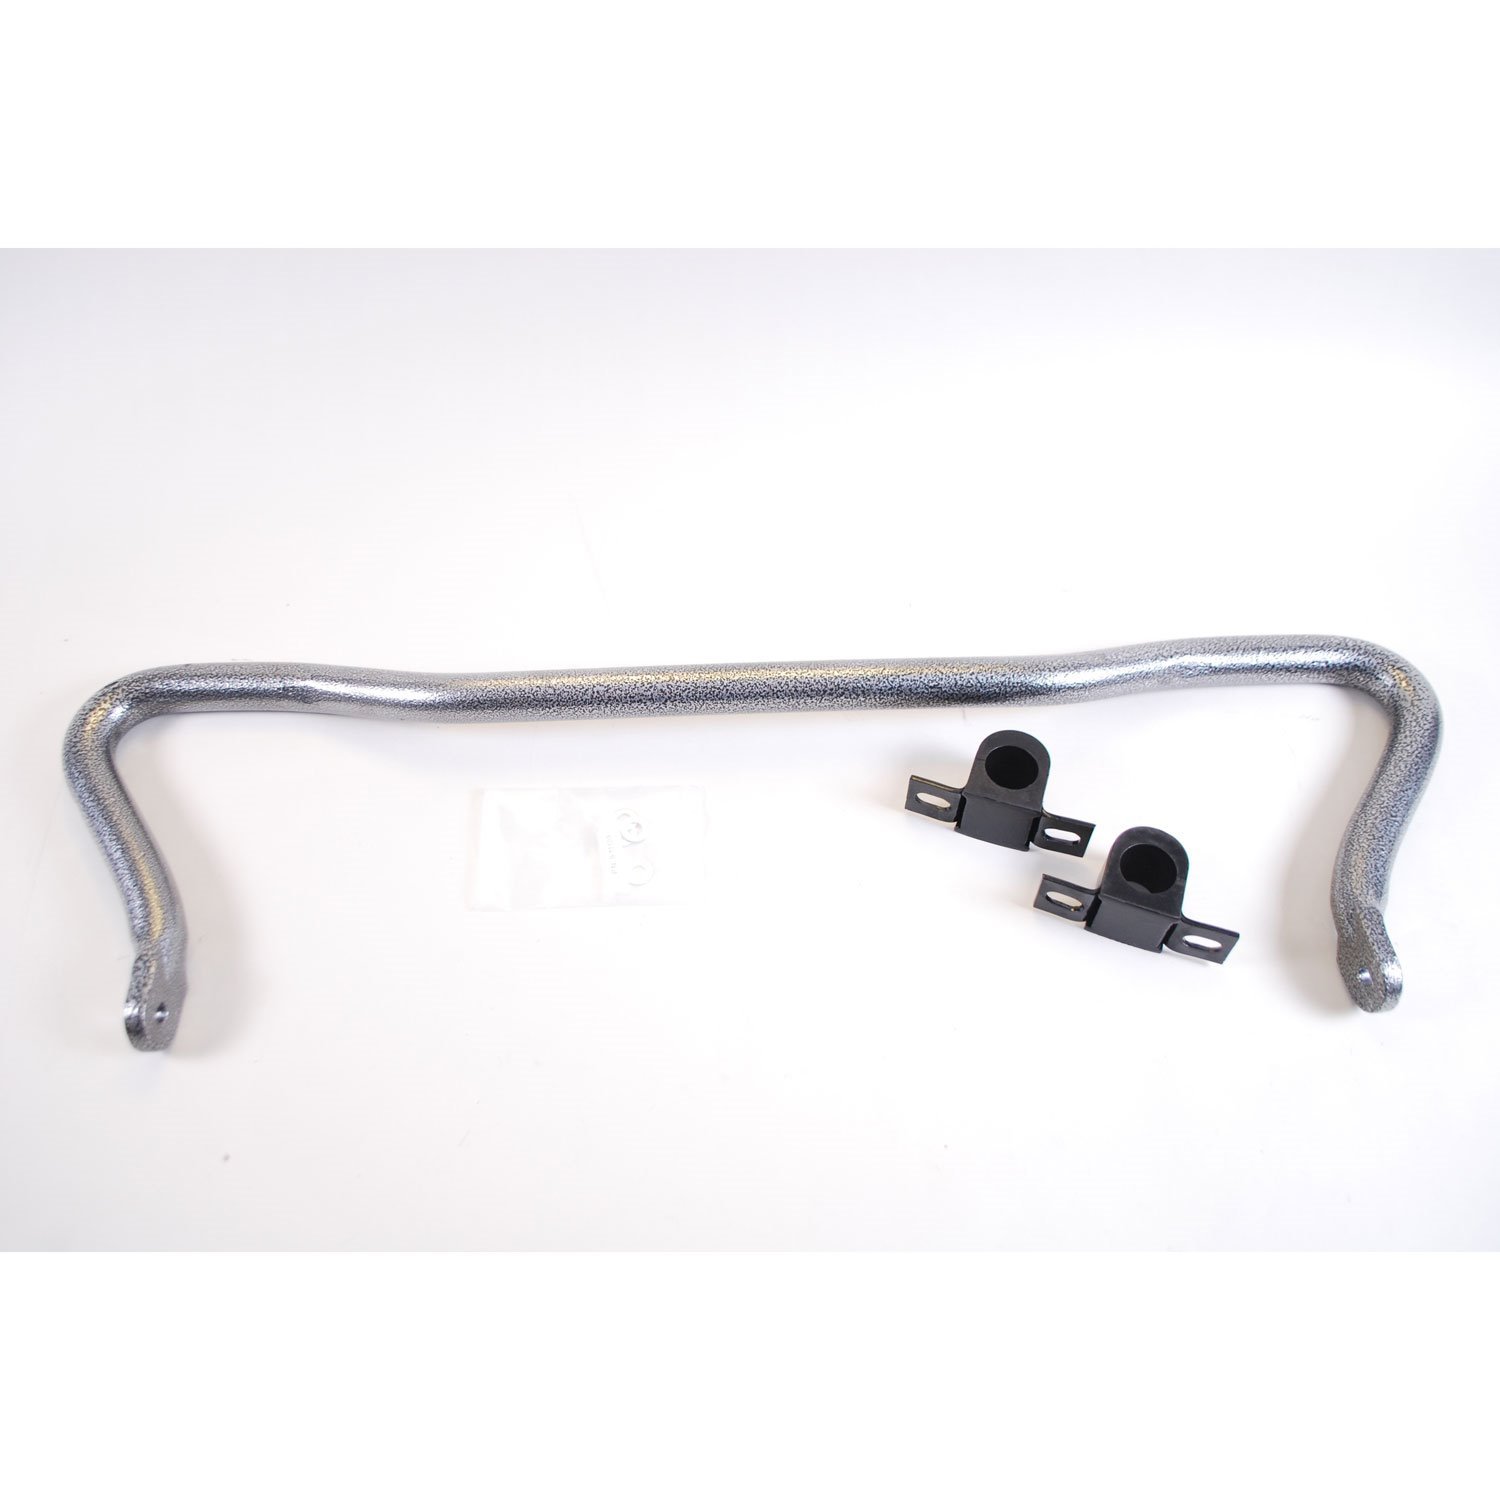 Front Sway Bar for 1999-2004 Ford F-250/F-350 4WD, 2000-2007 Ford F-450 2WD, and 2000-2005 Ford Excursion 4WD